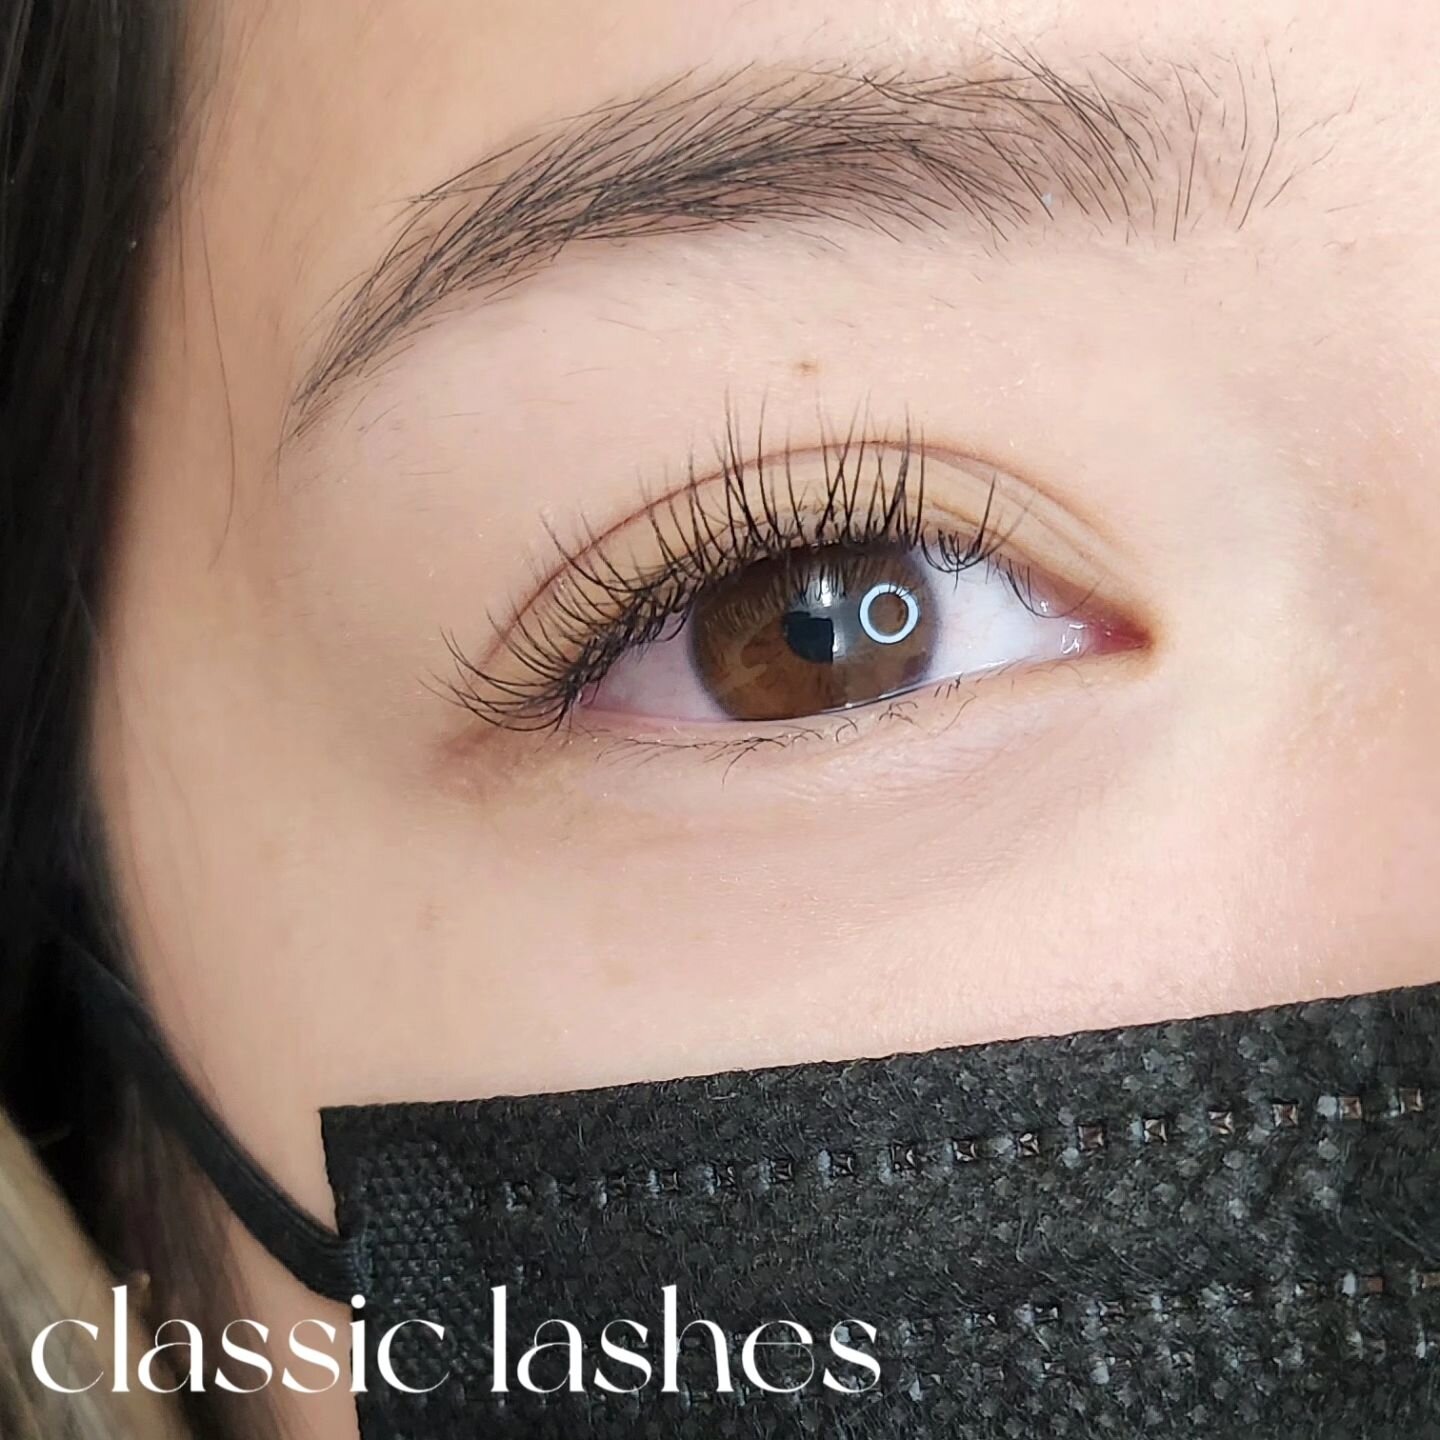 Brb, just dreaming about these lashes 😊🩷

Natural open eye mapping using D curl lashes ☀️

✨⁣𝐈𝐧𝐭𝐞𝐫𝐞𝐬𝐭𝐞𝐝 𝐢𝐧 𝐛𝐨𝐨𝐤𝐢𝐧𝐠 𝐚𝐧 𝐚𝐩𝐩𝐨𝐢𝐧𝐭𝐦𝐞𝐧𝐭?✨

⛅ Click the link in the bio to book! Or visit: www.gentlylashed.com/book

 #classic